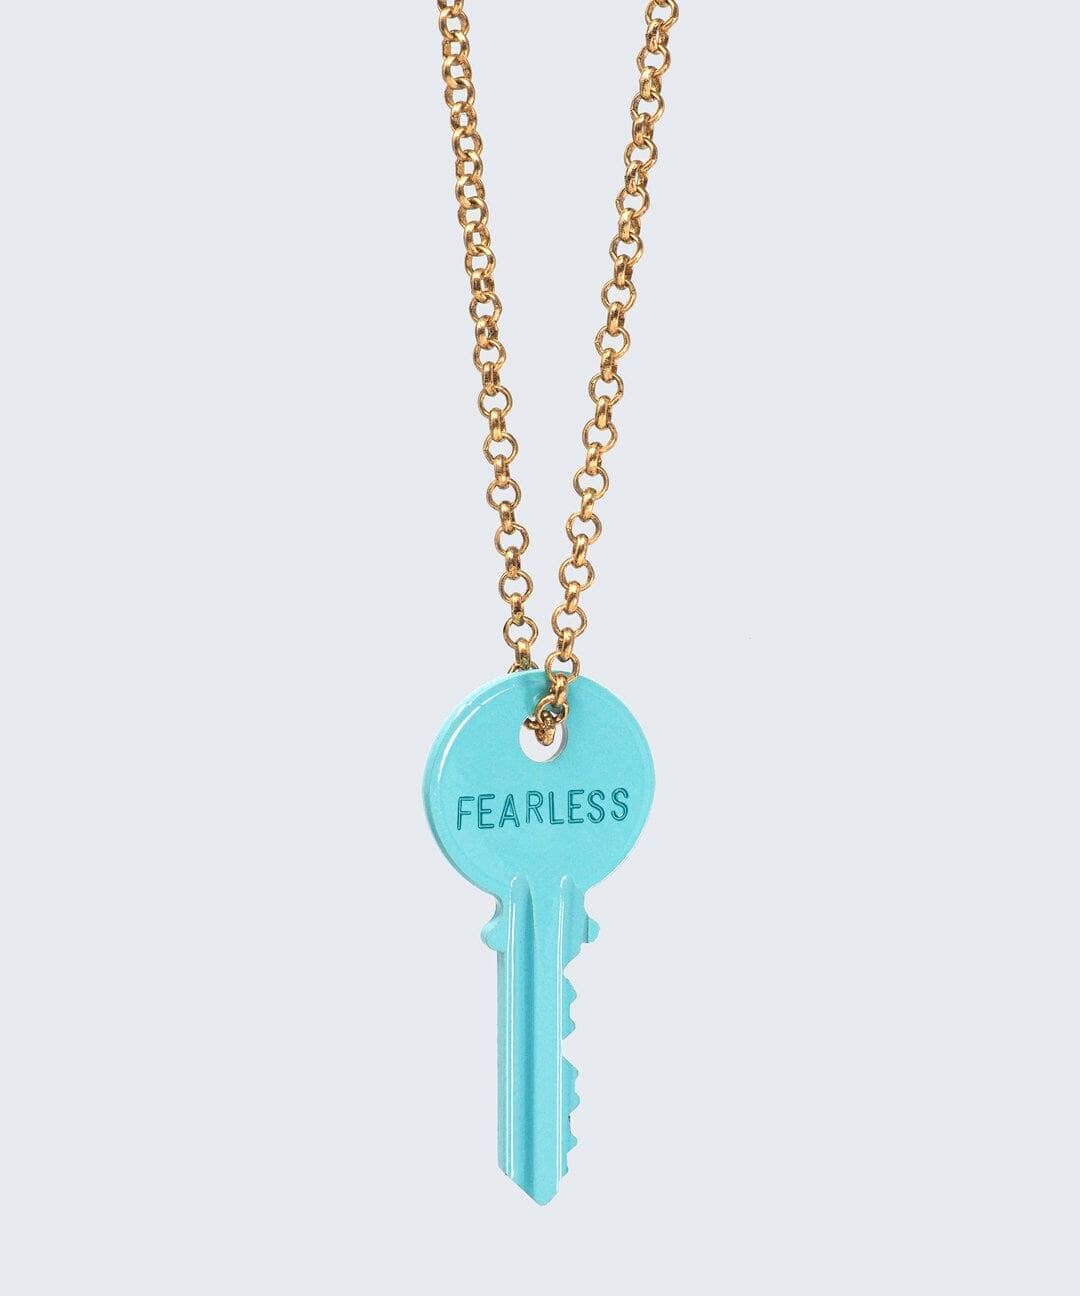 N - Sky Blue Classic Ball Chain Key Necklace Necklaces The Giving Keys 